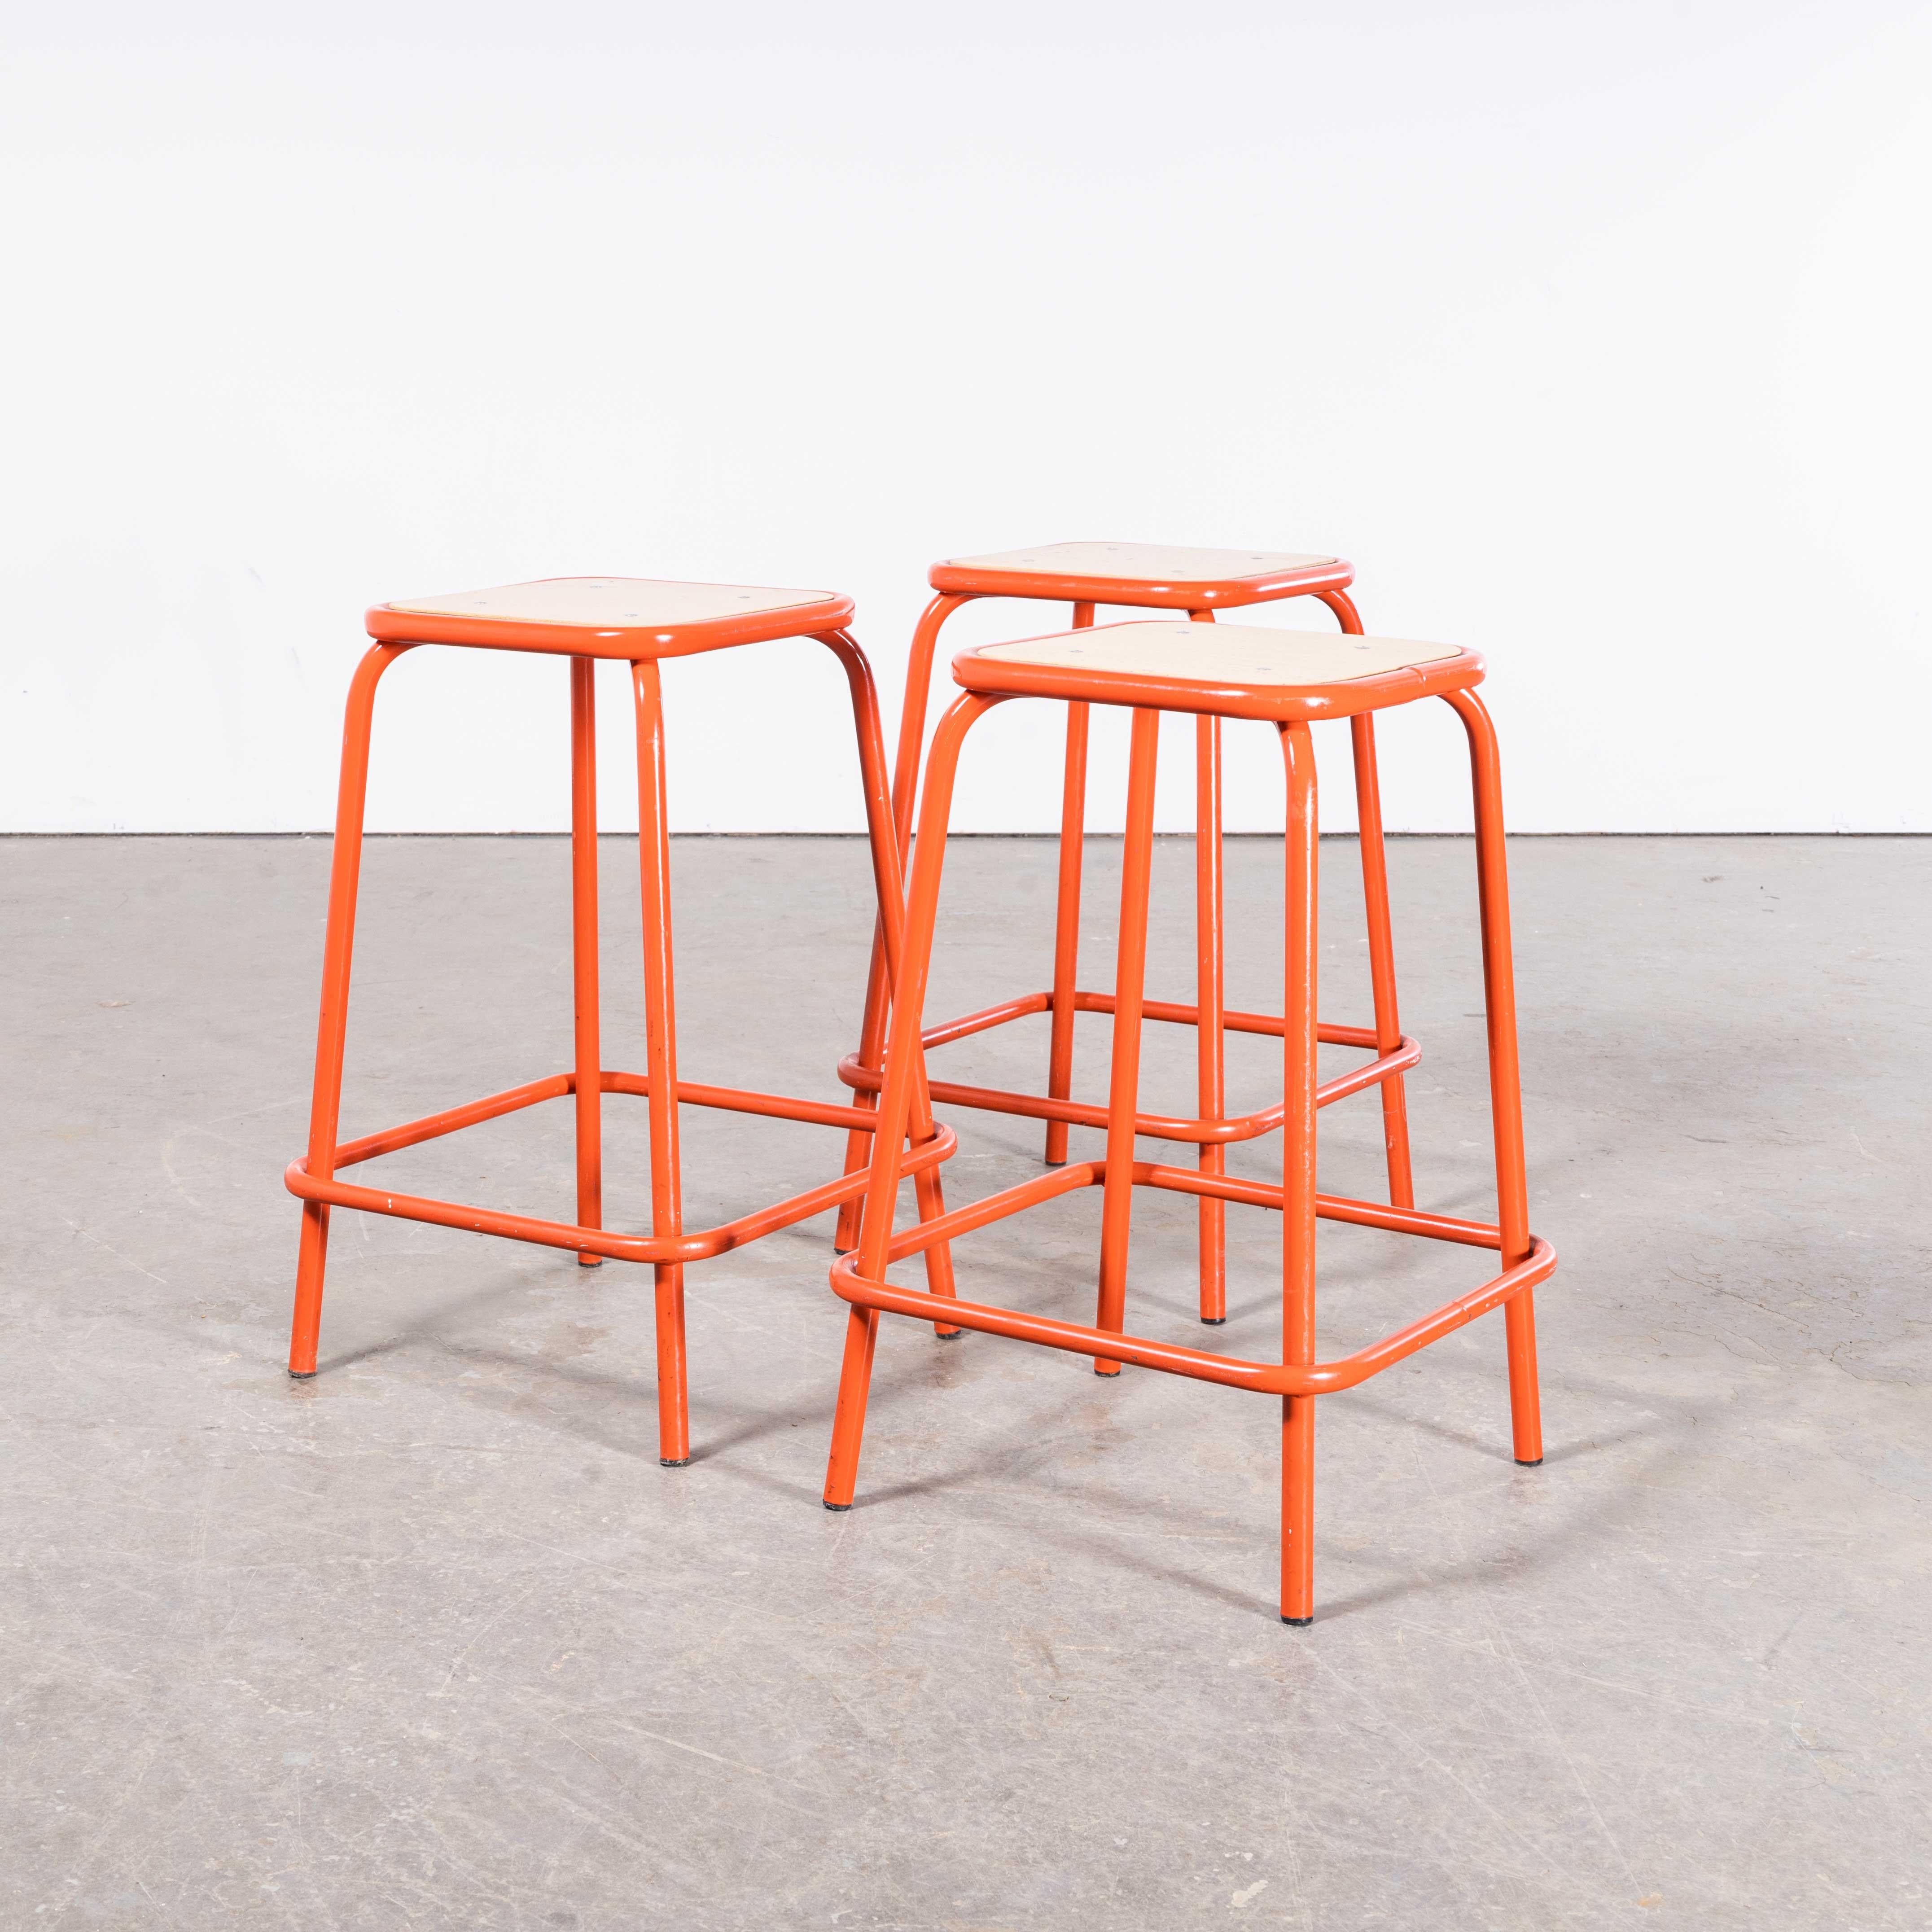 1970’s French Bright Red Laboratory Stools – Set Of Three
1970’s French Bright Red Laboratory Stools – Set Of Three. Good honest lab stools, heavy steel frames with solid heavy birch ply seats. We clean them and check all fixings, they are good to